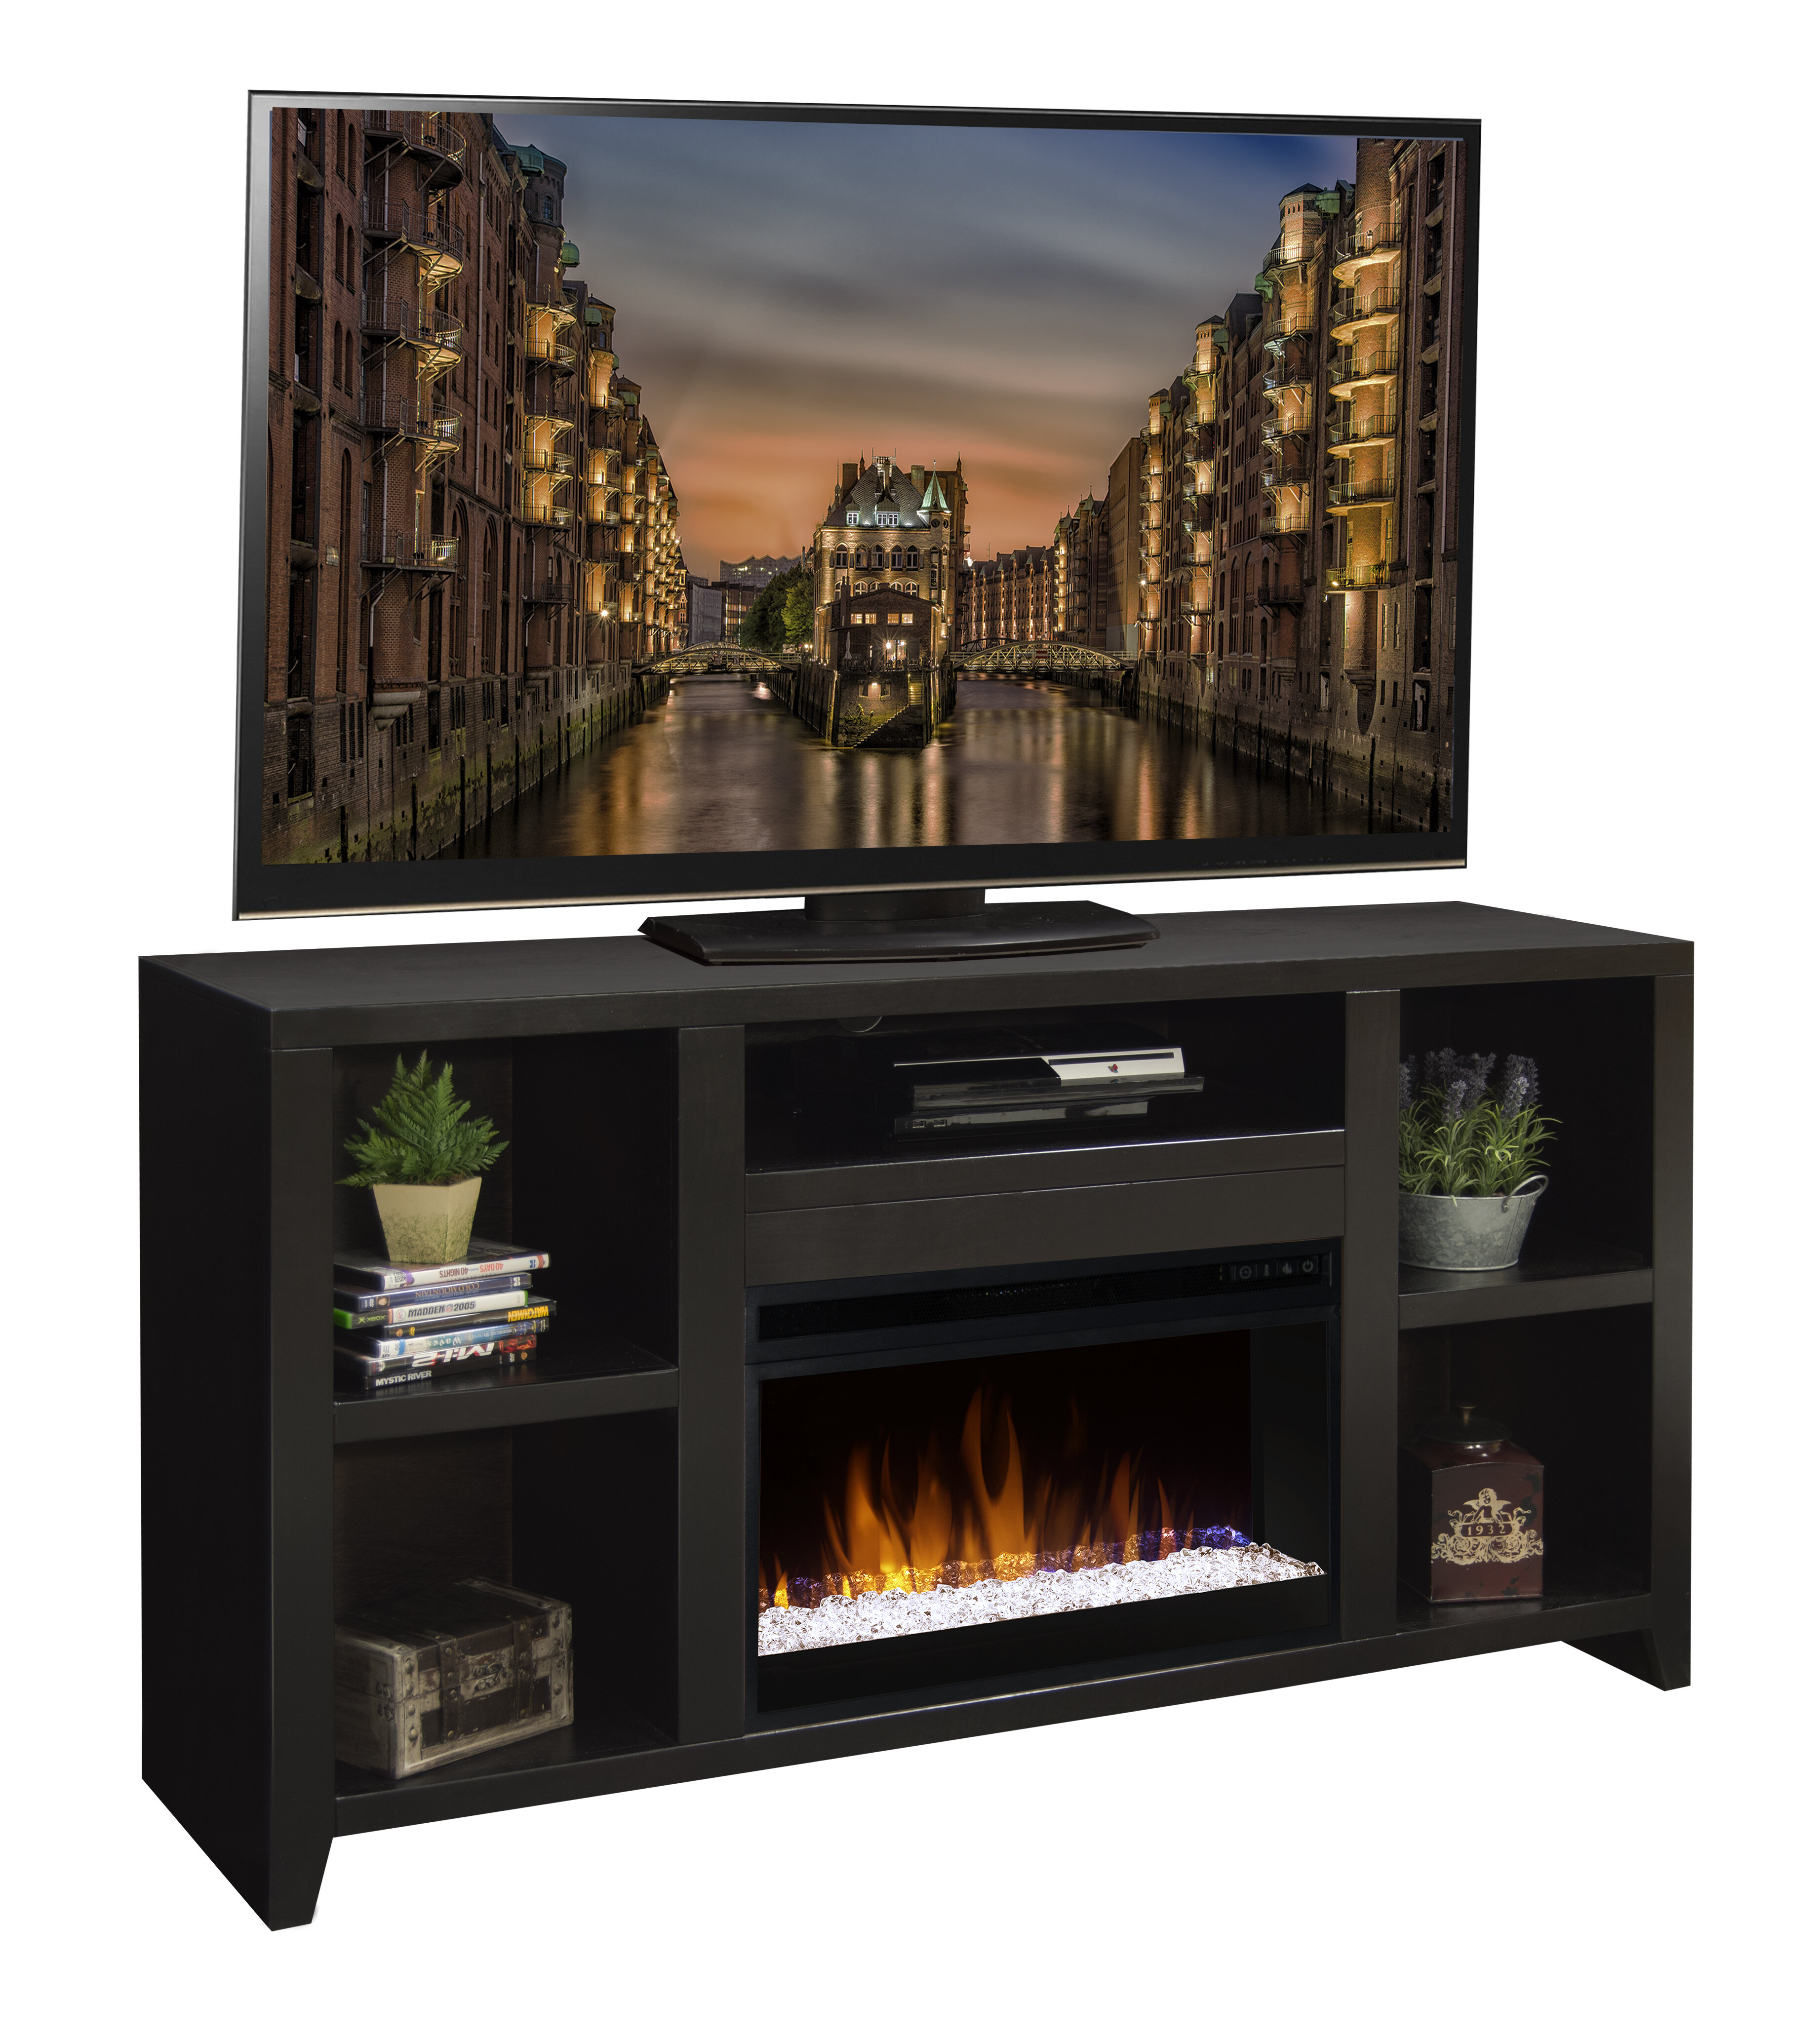 Wayfair Fireplace Tv Stand Luxury Garretson Tv Stand for Tvs Up to 65" with Fireplace